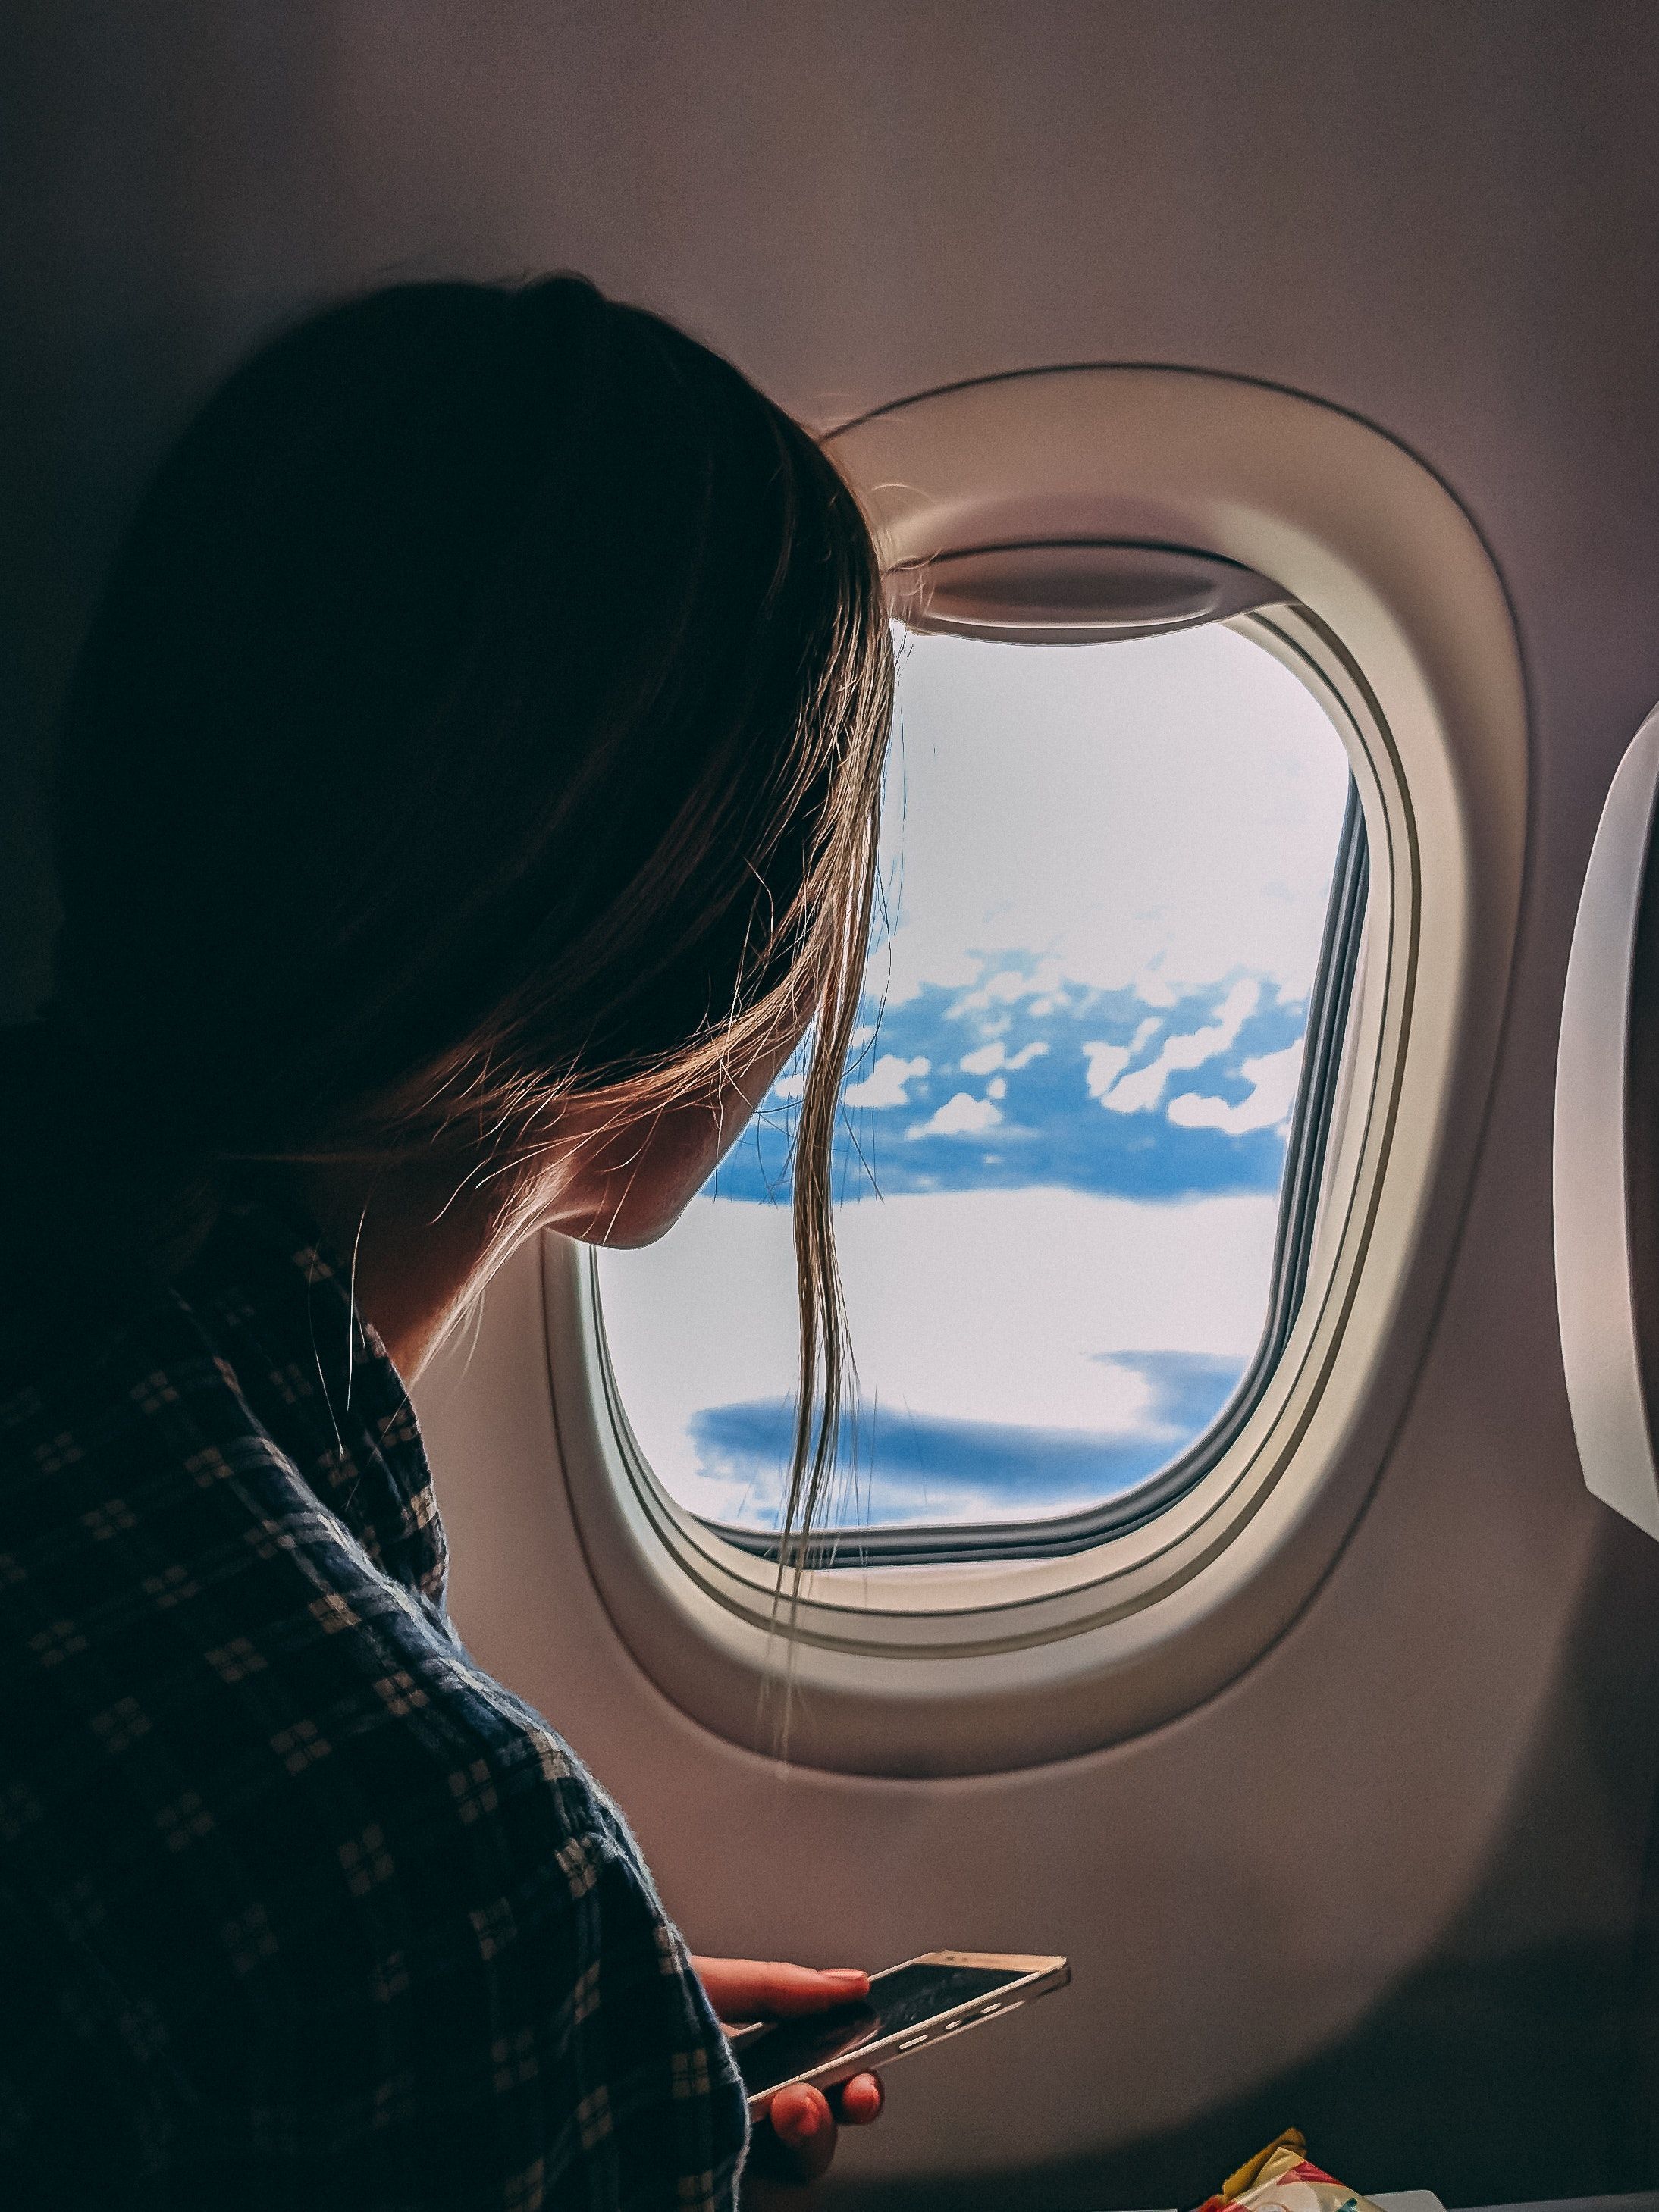 A woman looks out of a plane window at the clouds - Travel, airplane